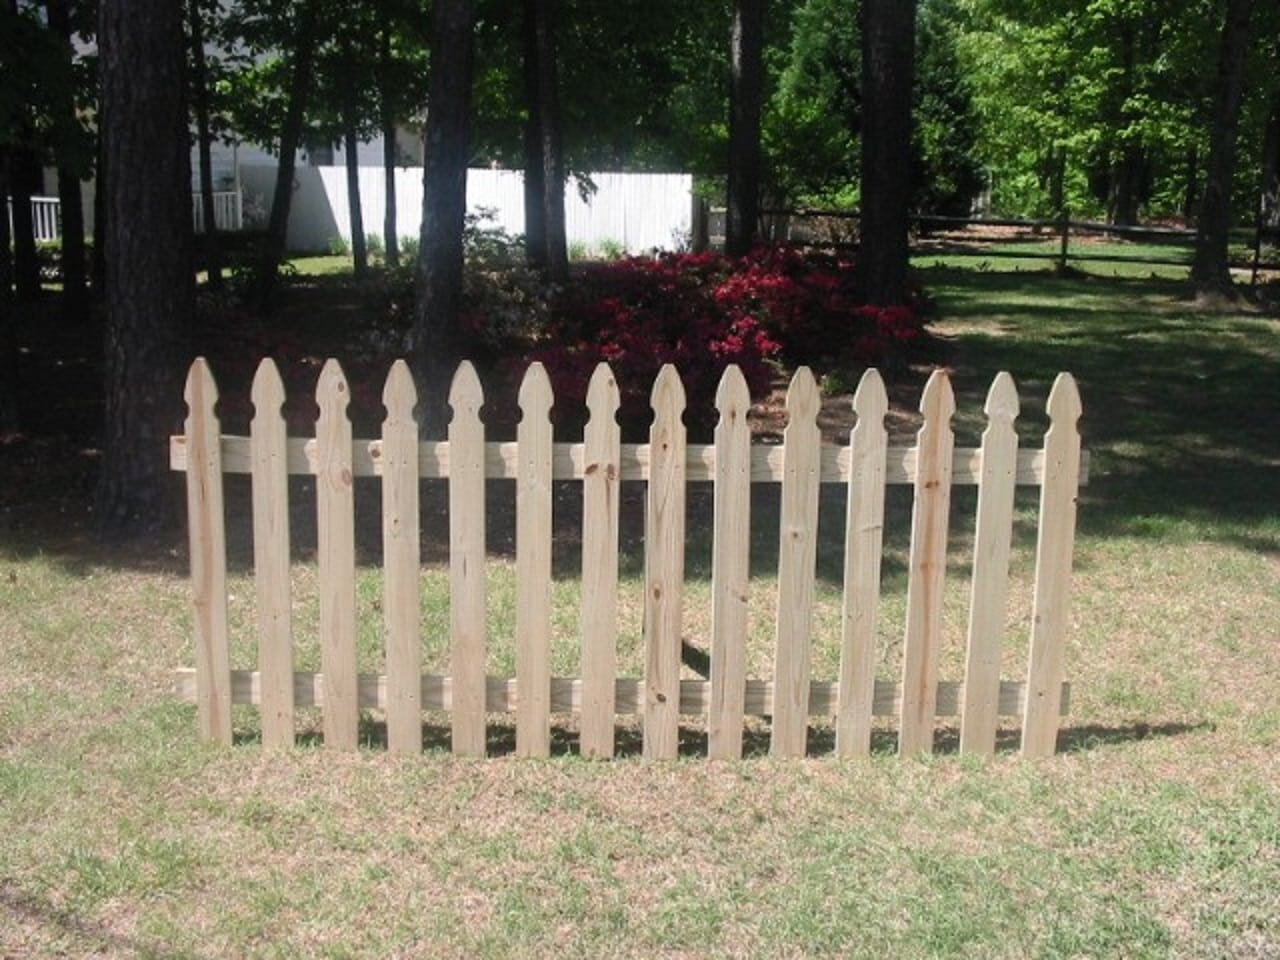 buy picket fence online